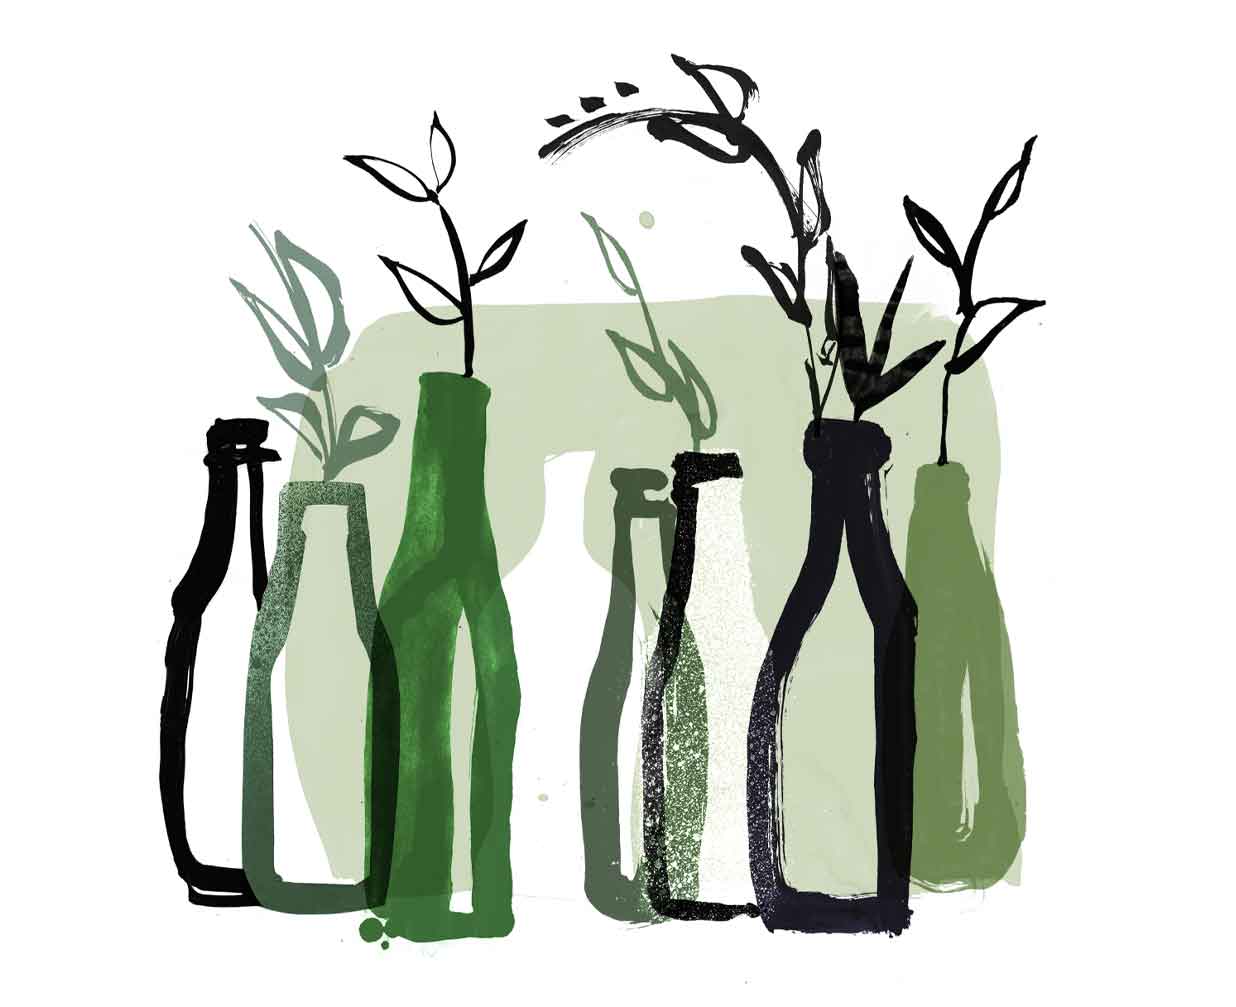 Objects Illustrated – Green Bottles